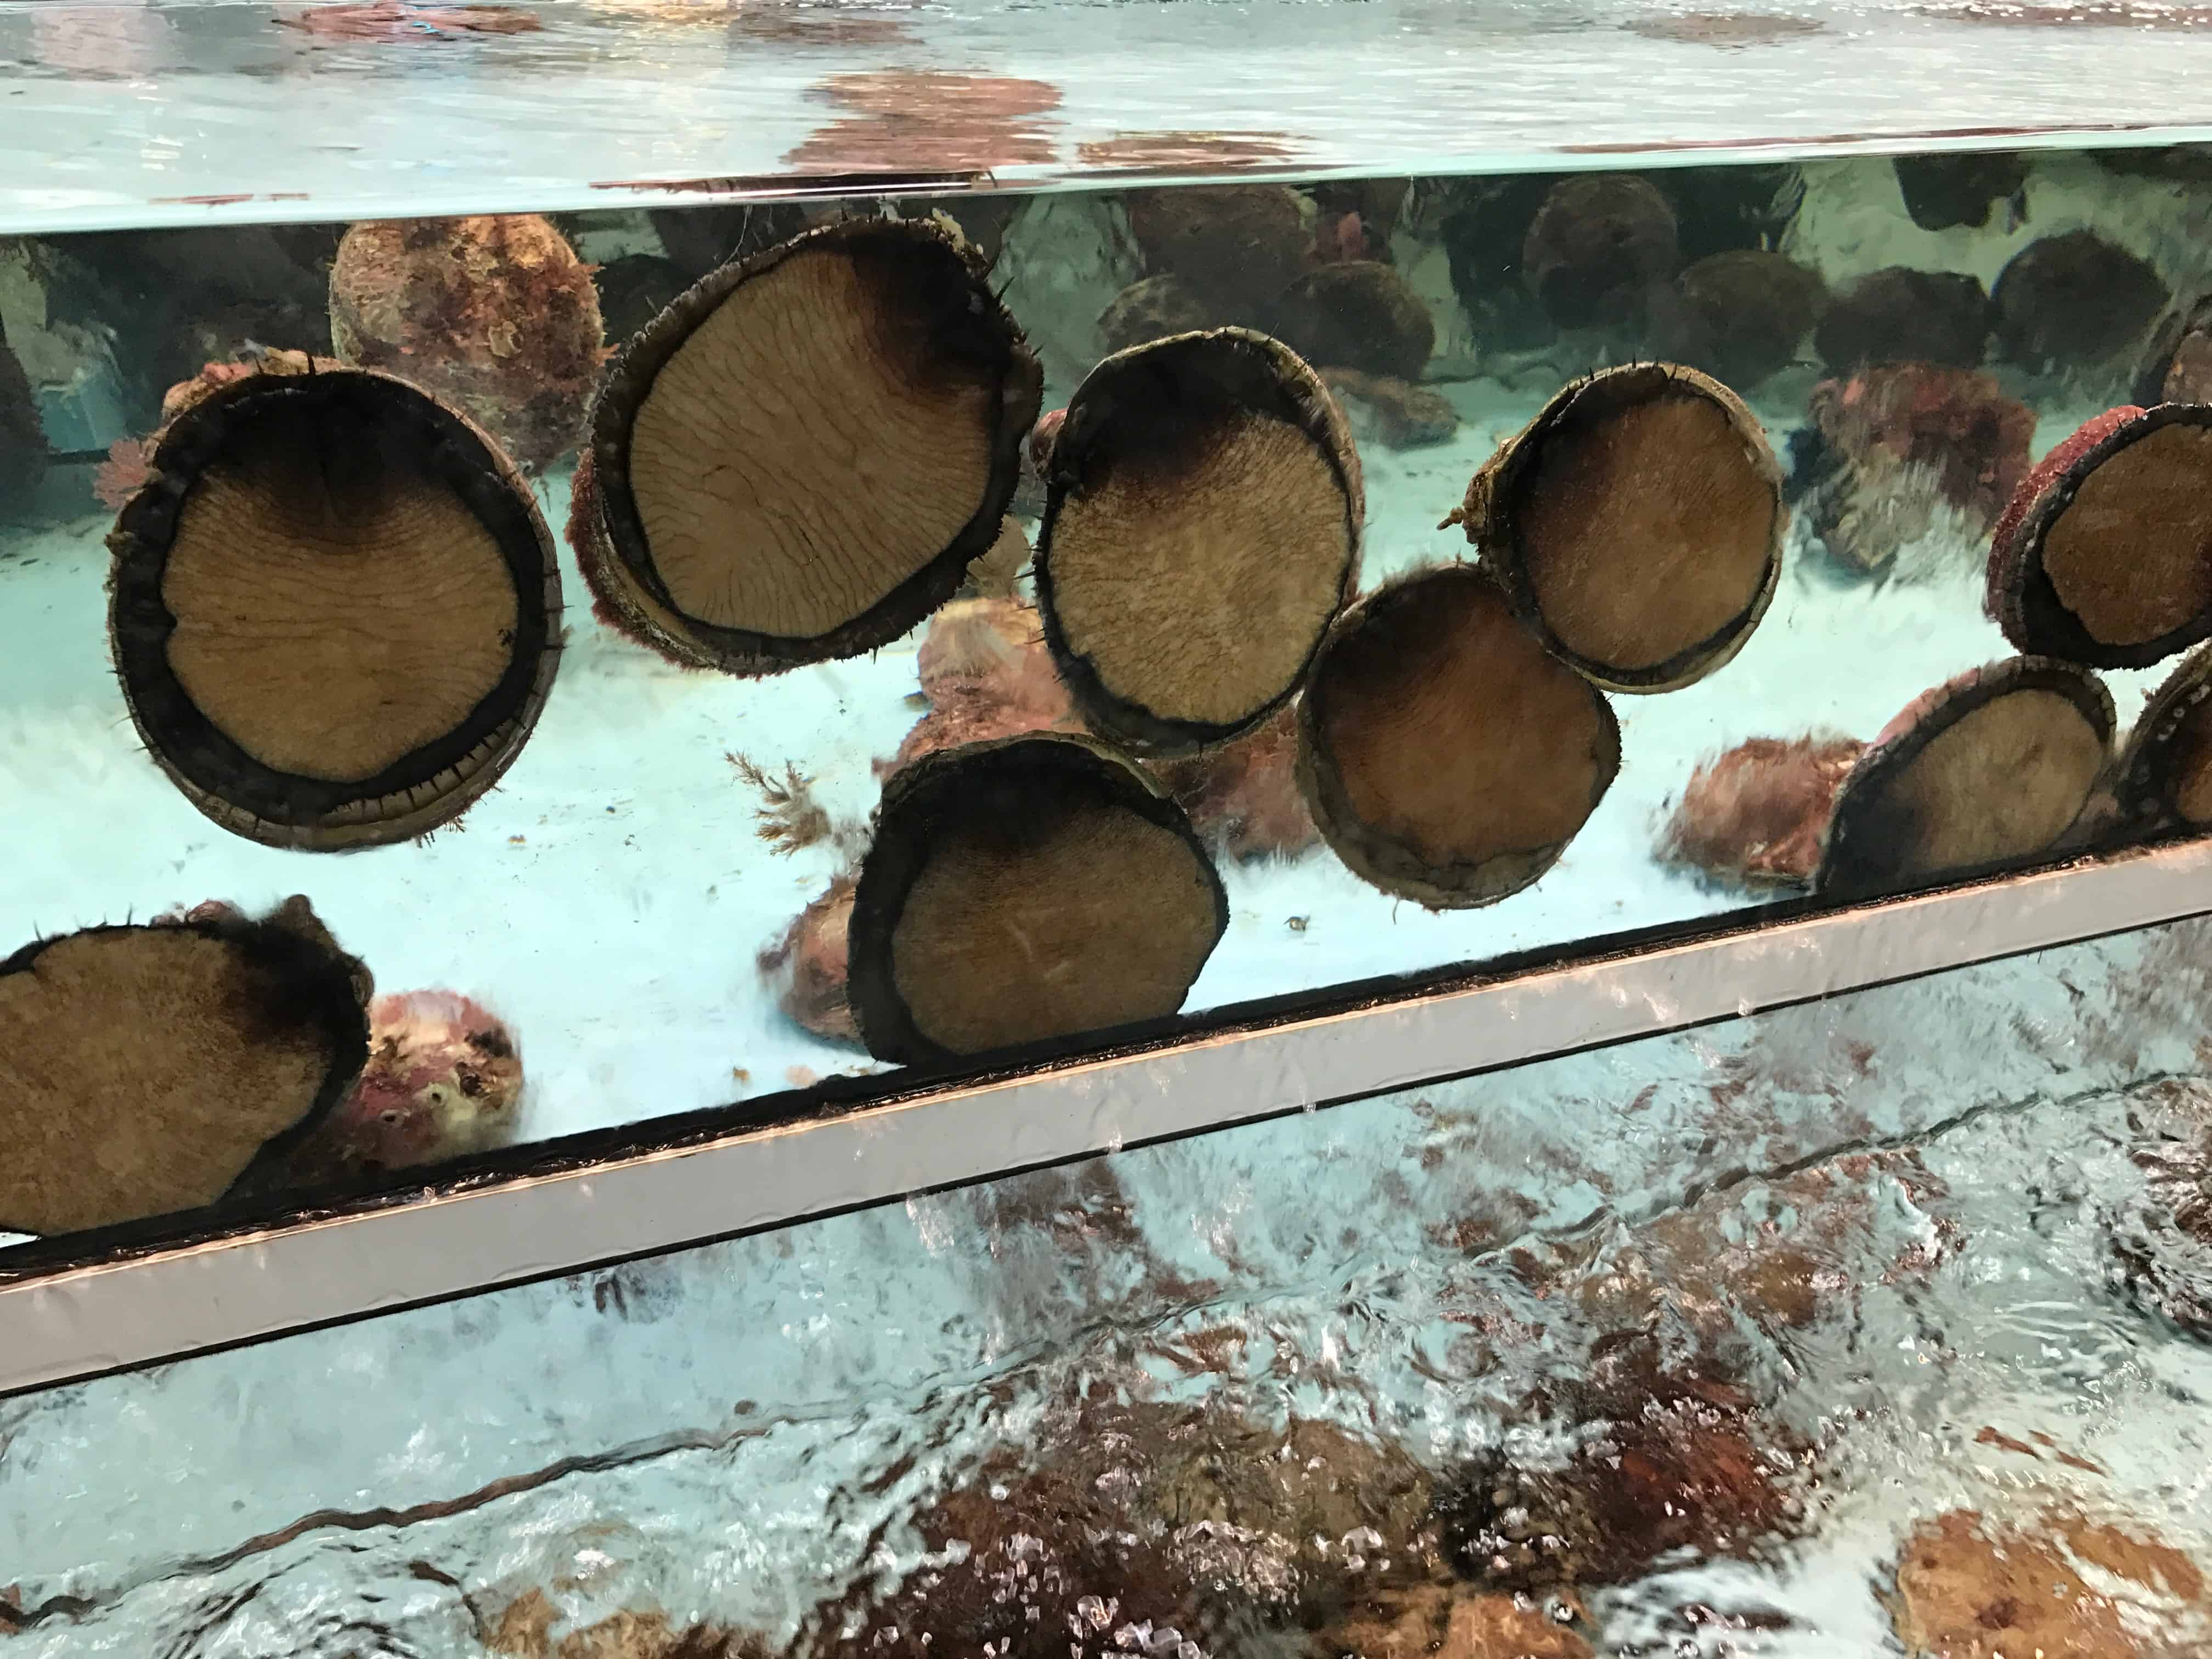 Live Abalone in tank